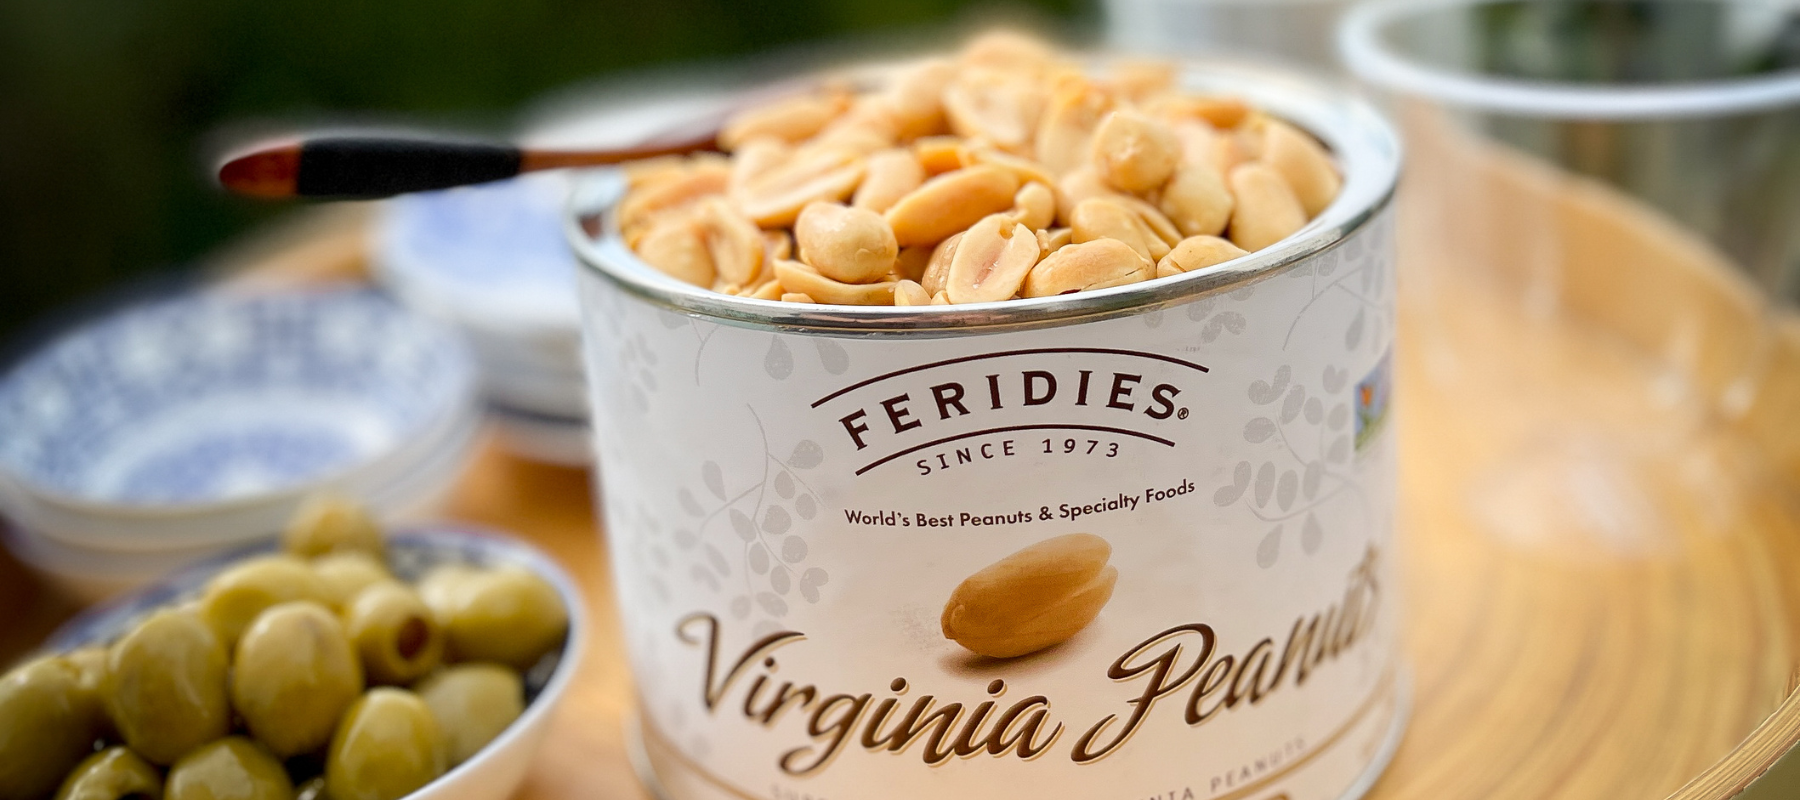 FEREDIES featured image, a can of peanuts next to a bowl of olives